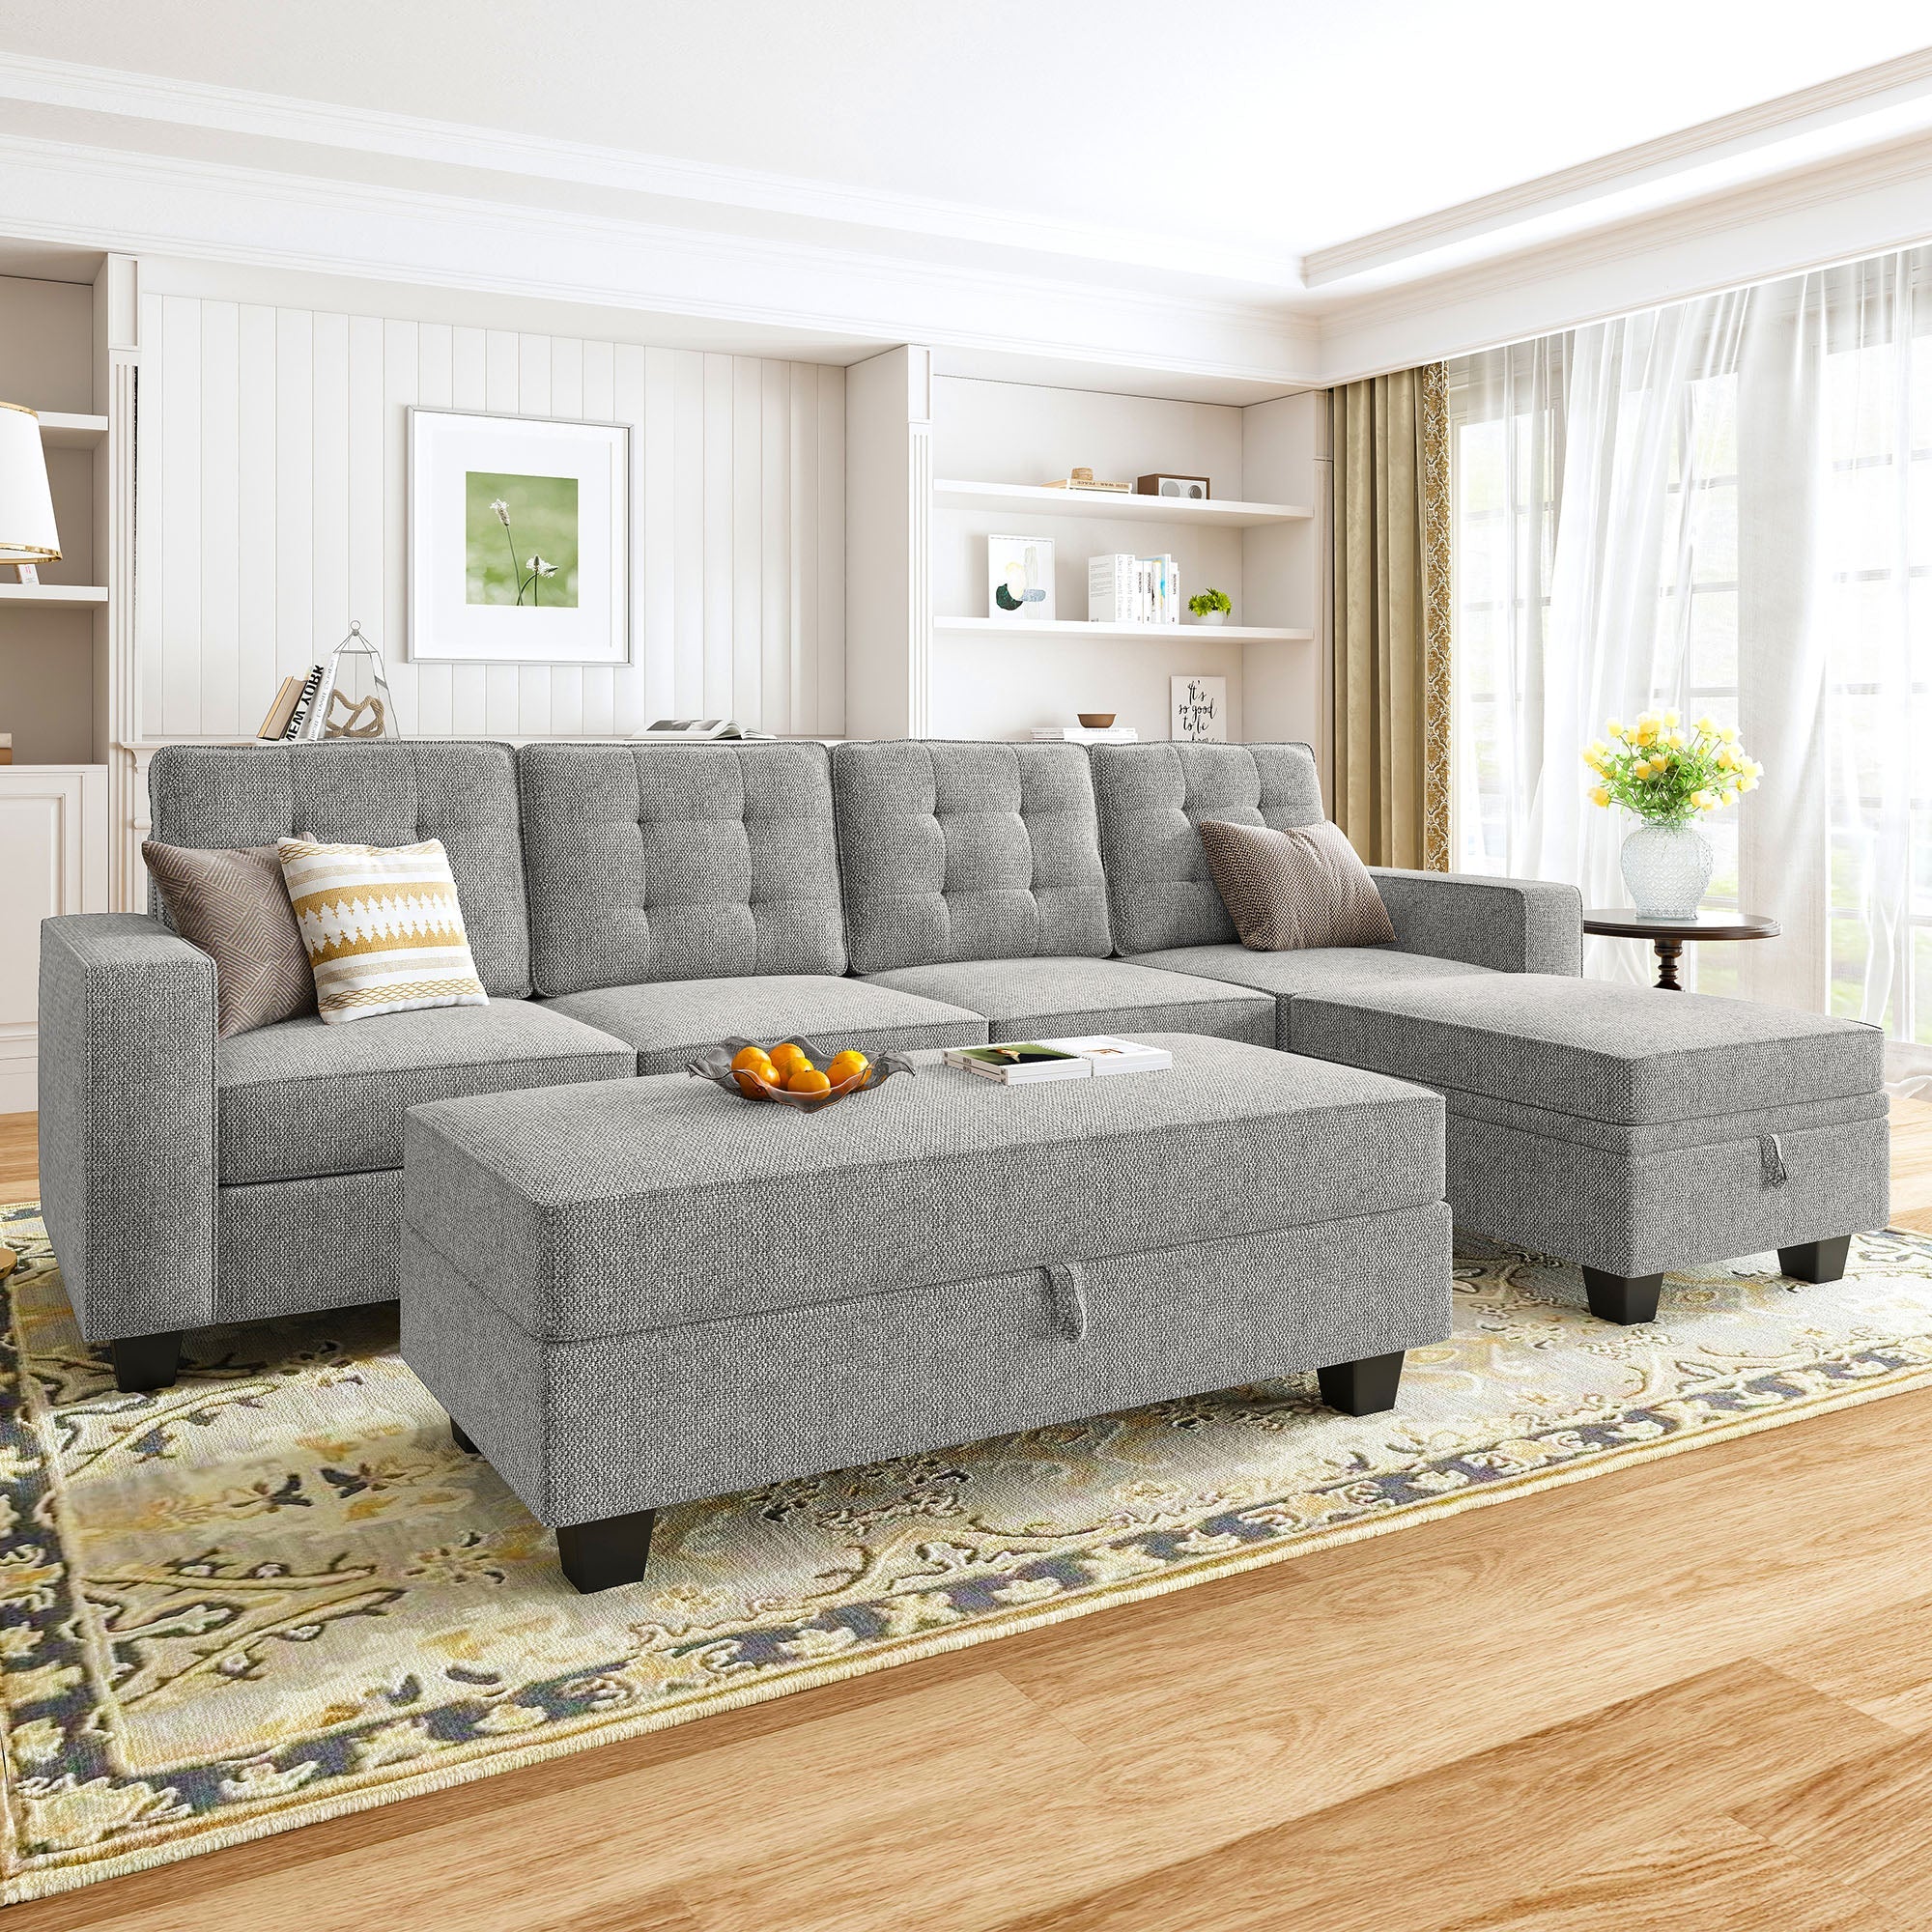 HONBAY L-Shaped Tufted Back Sectional Sofa with Extra Storage Ottoman